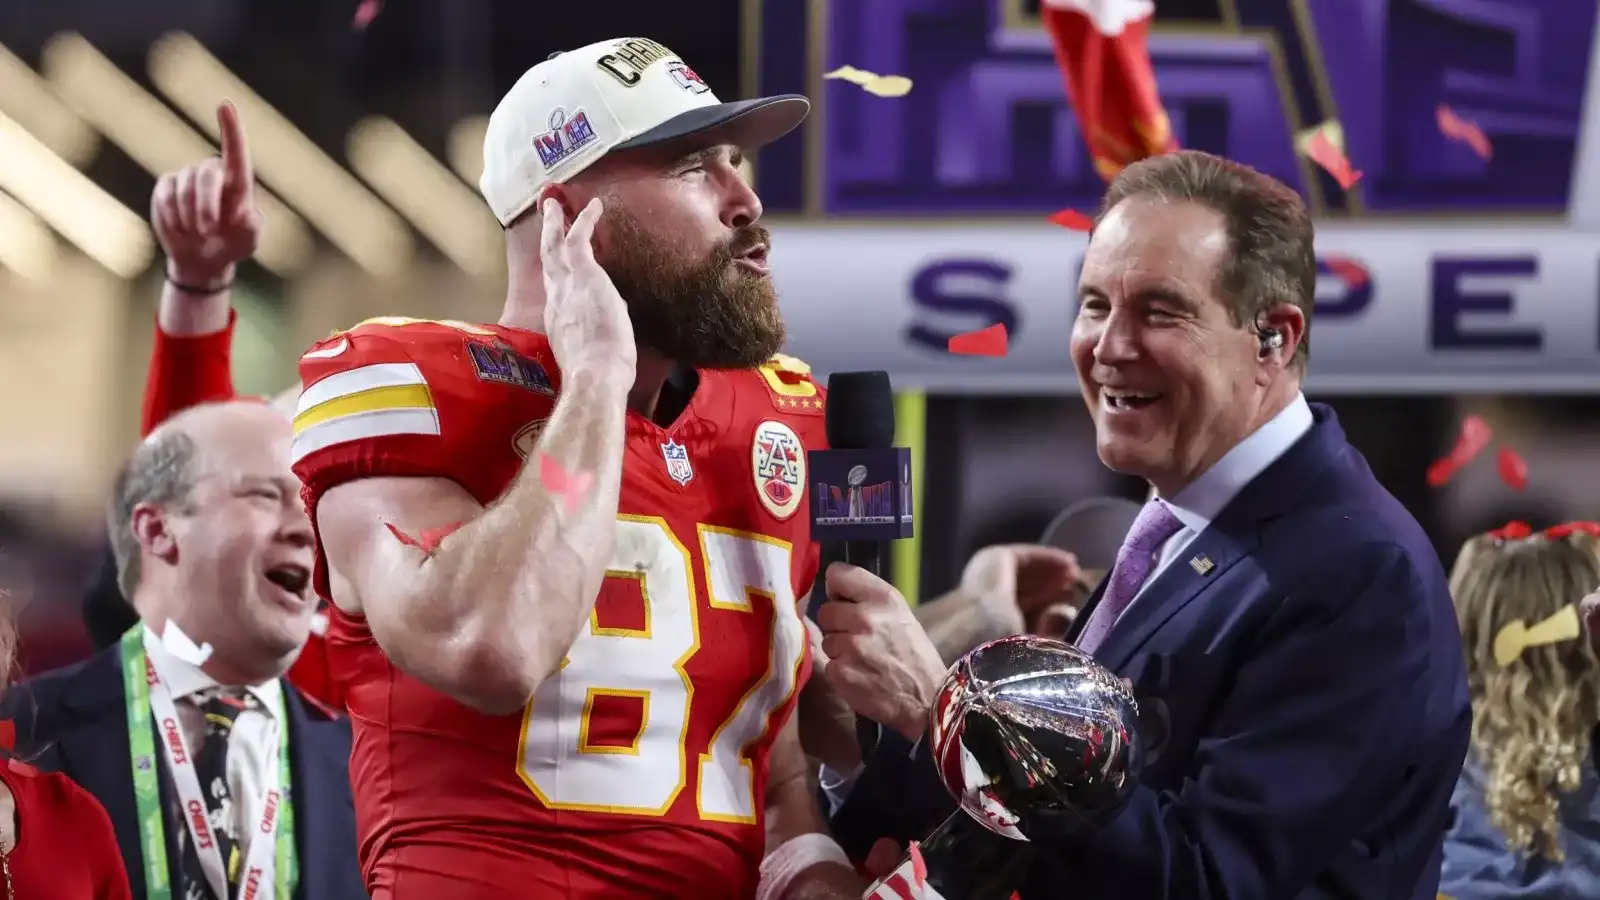 KC Chiefs parade: Travis Kelce and historical significance provide extra reason to watch